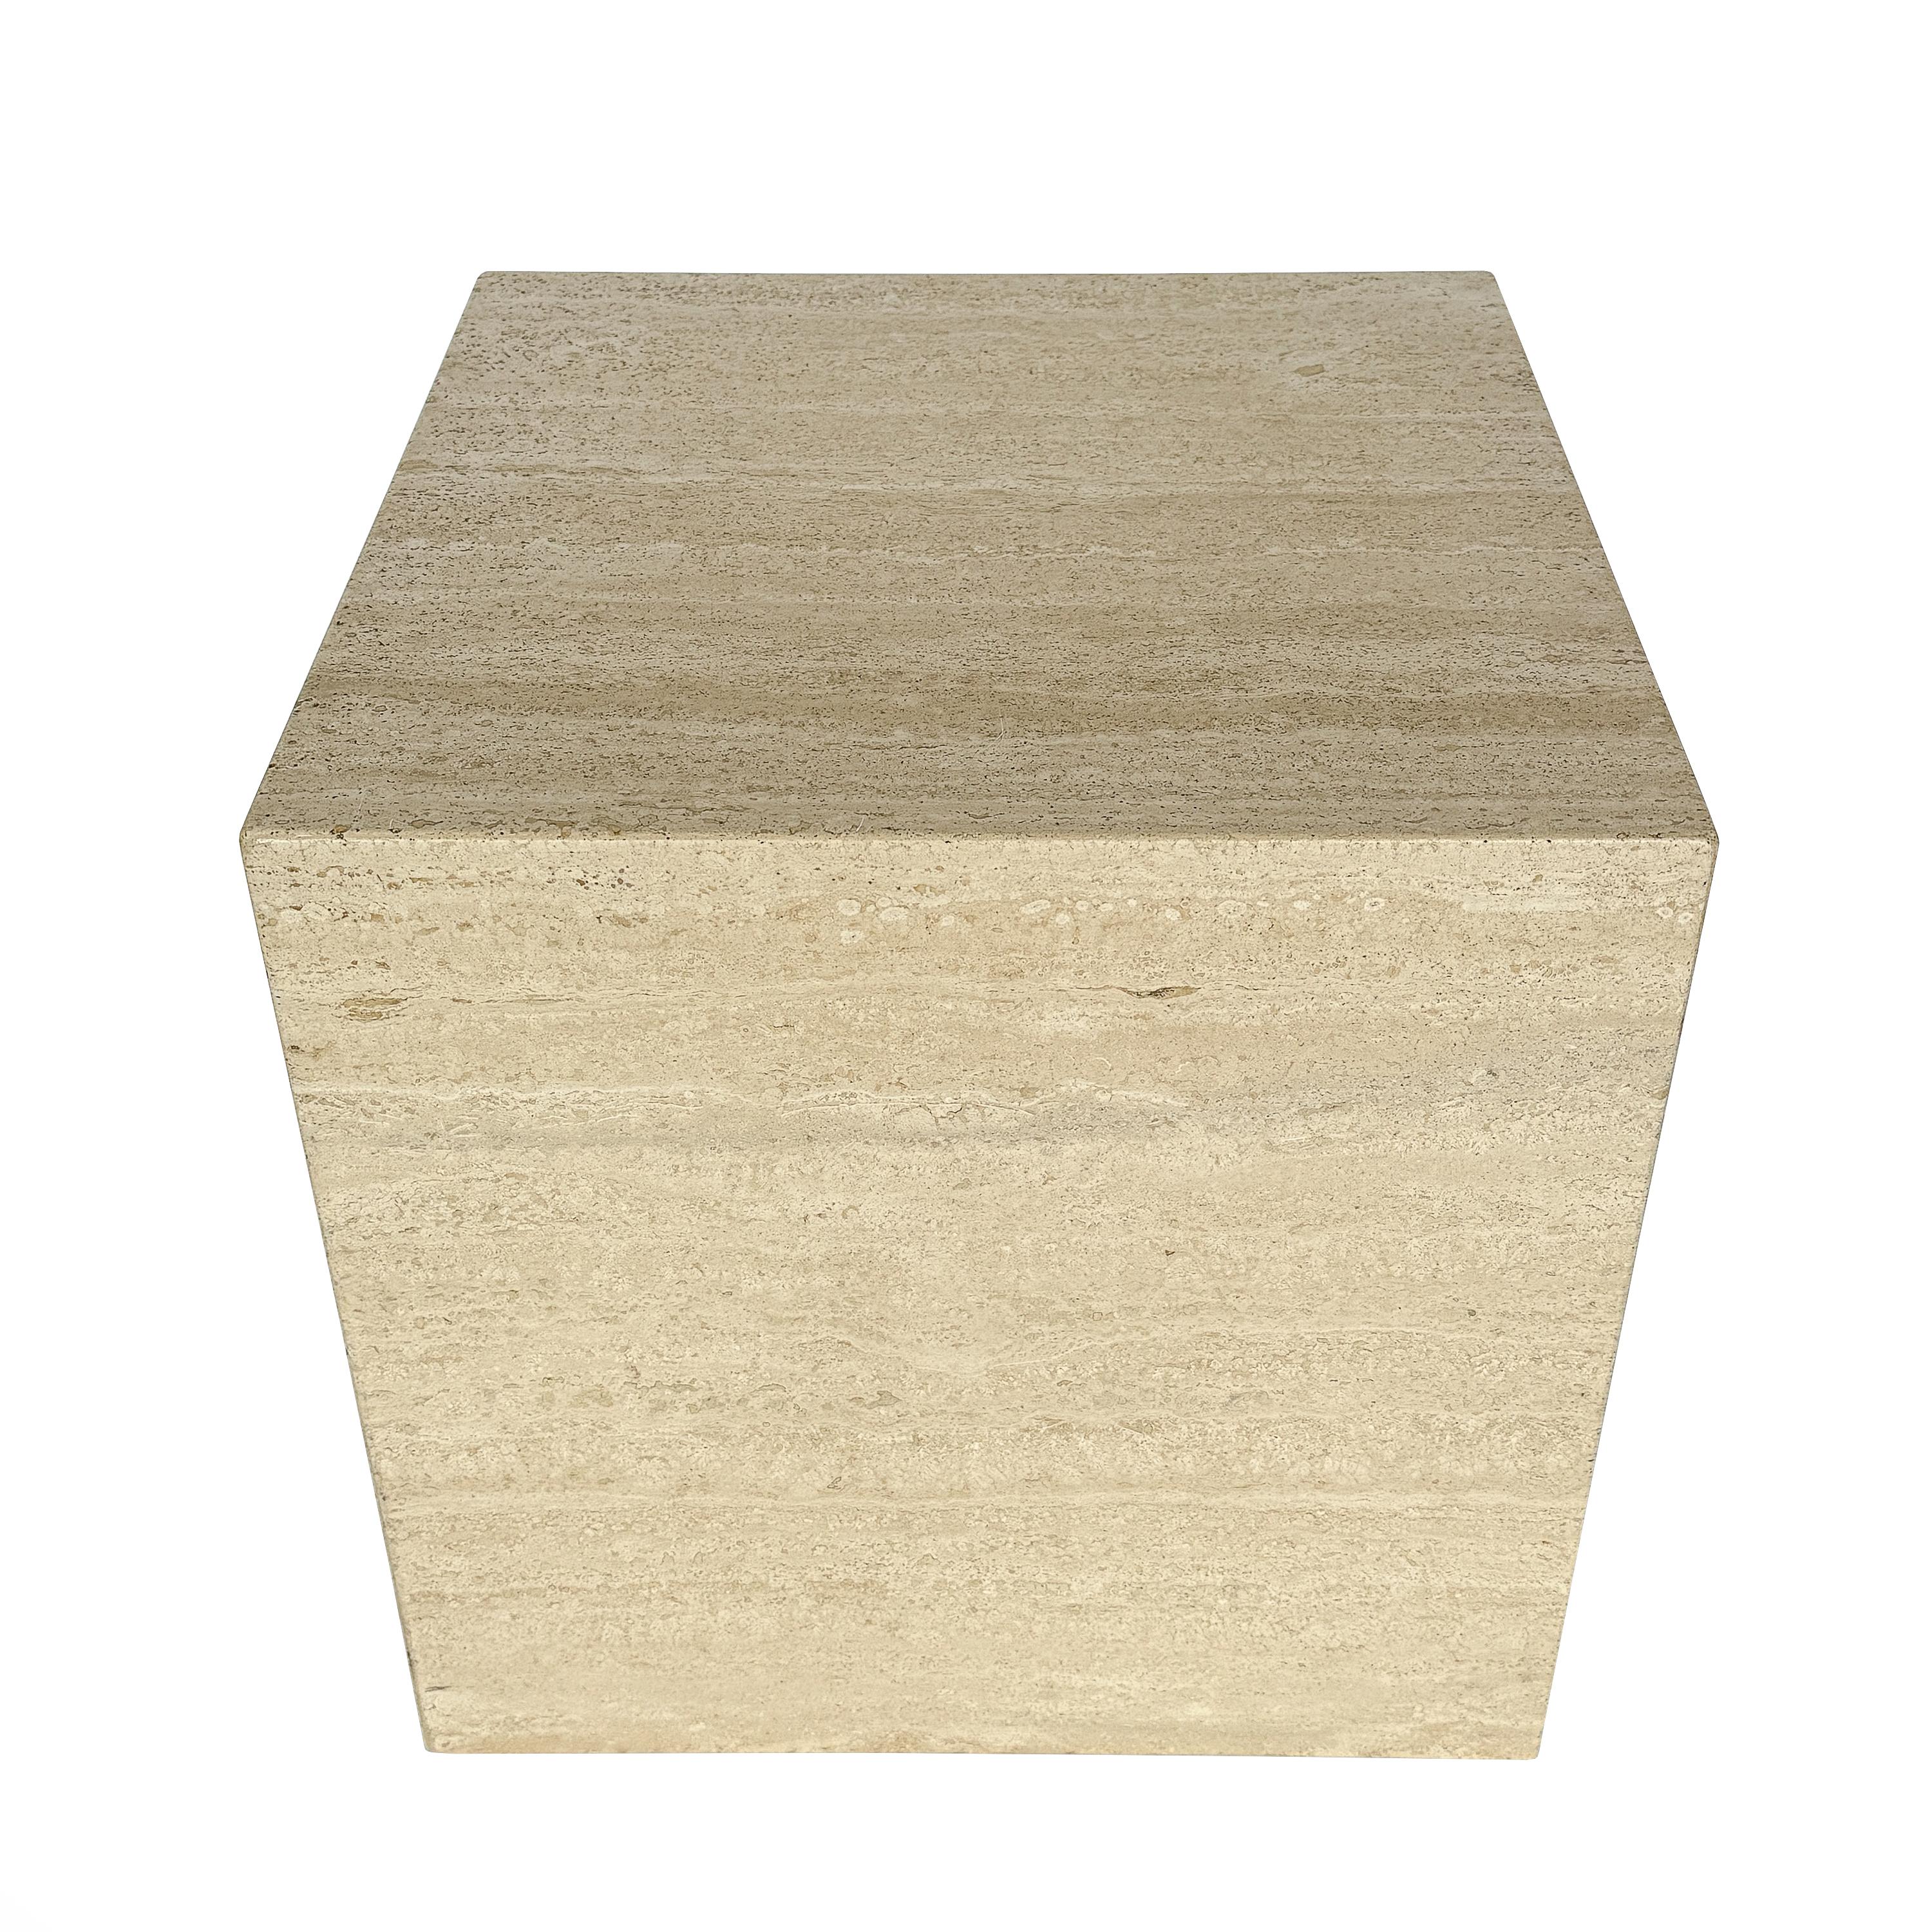 Immerse yourself in the pure essence of minimalist design with this Italian travertine cube side table, Italy circa 1970s. Each face of the cube exudes a serene elegance, with the natural beauty of filled travertine stone offering a tactile and